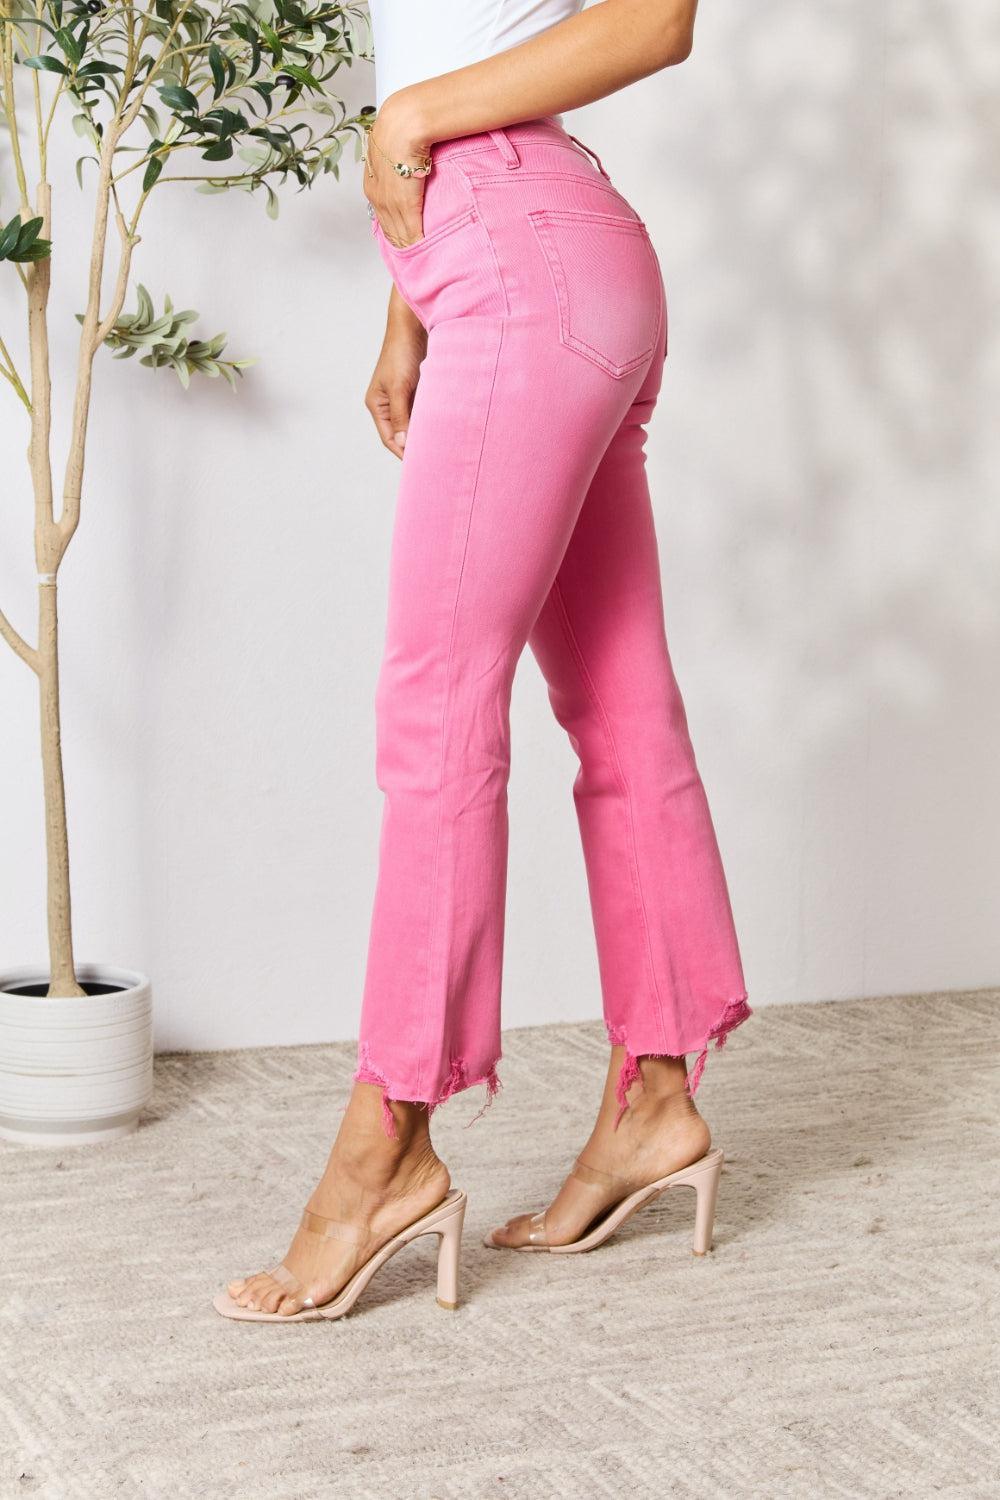 a woman in a white shirt and pink pants